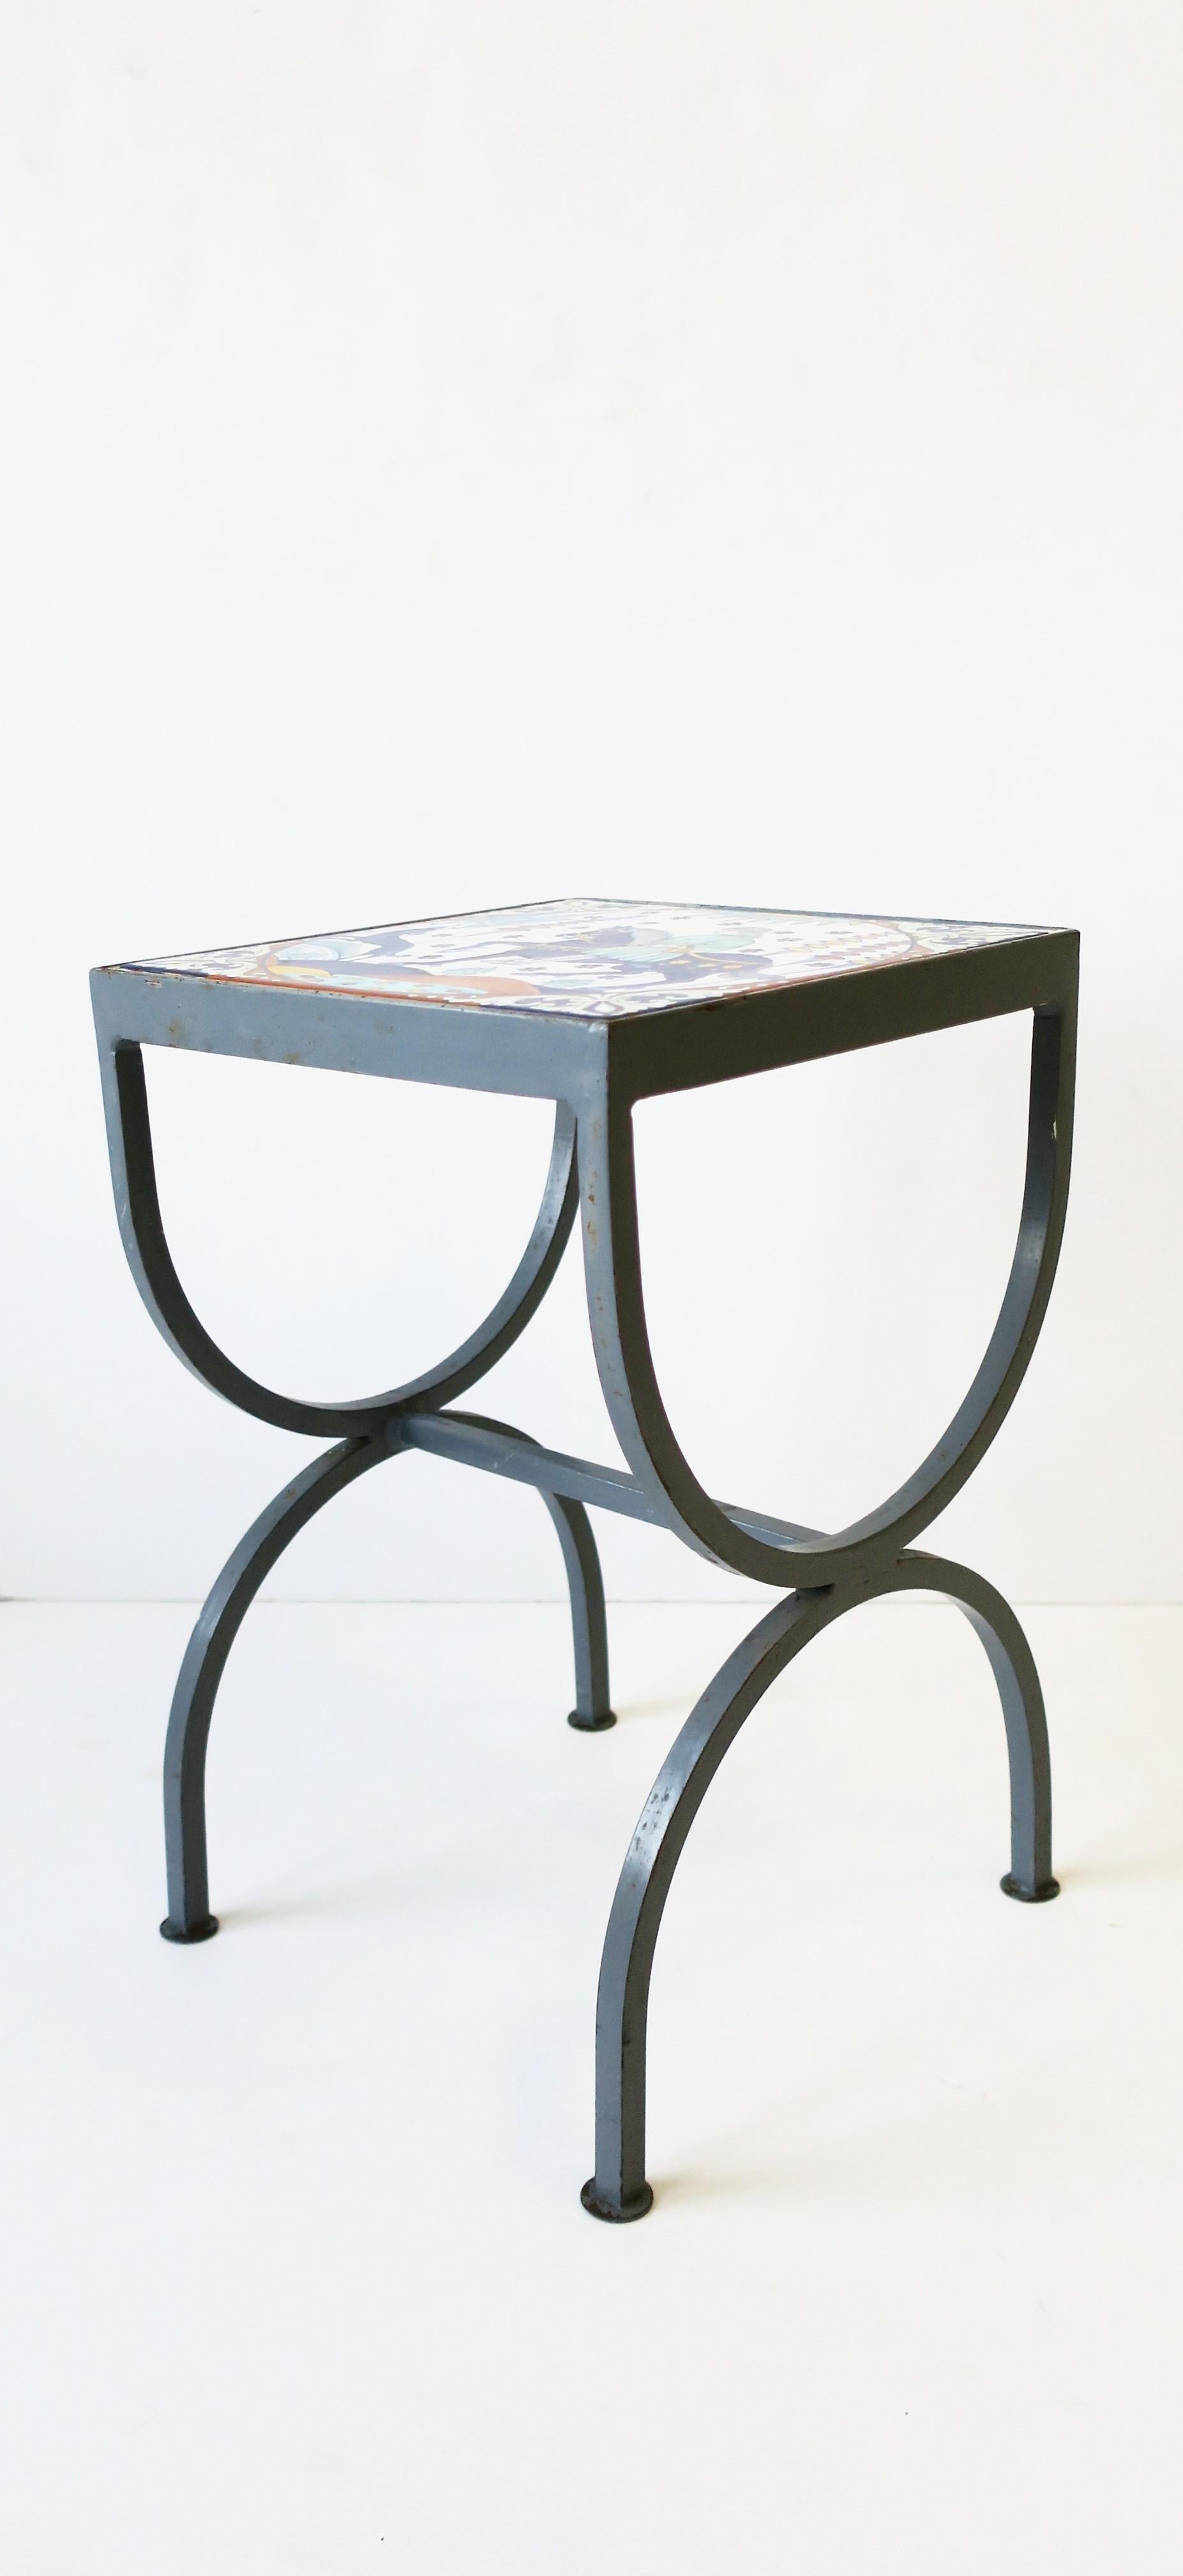 Tile Top Grey Metal Side or Drinks Table Indoors or Patio in the style of Hermes 7